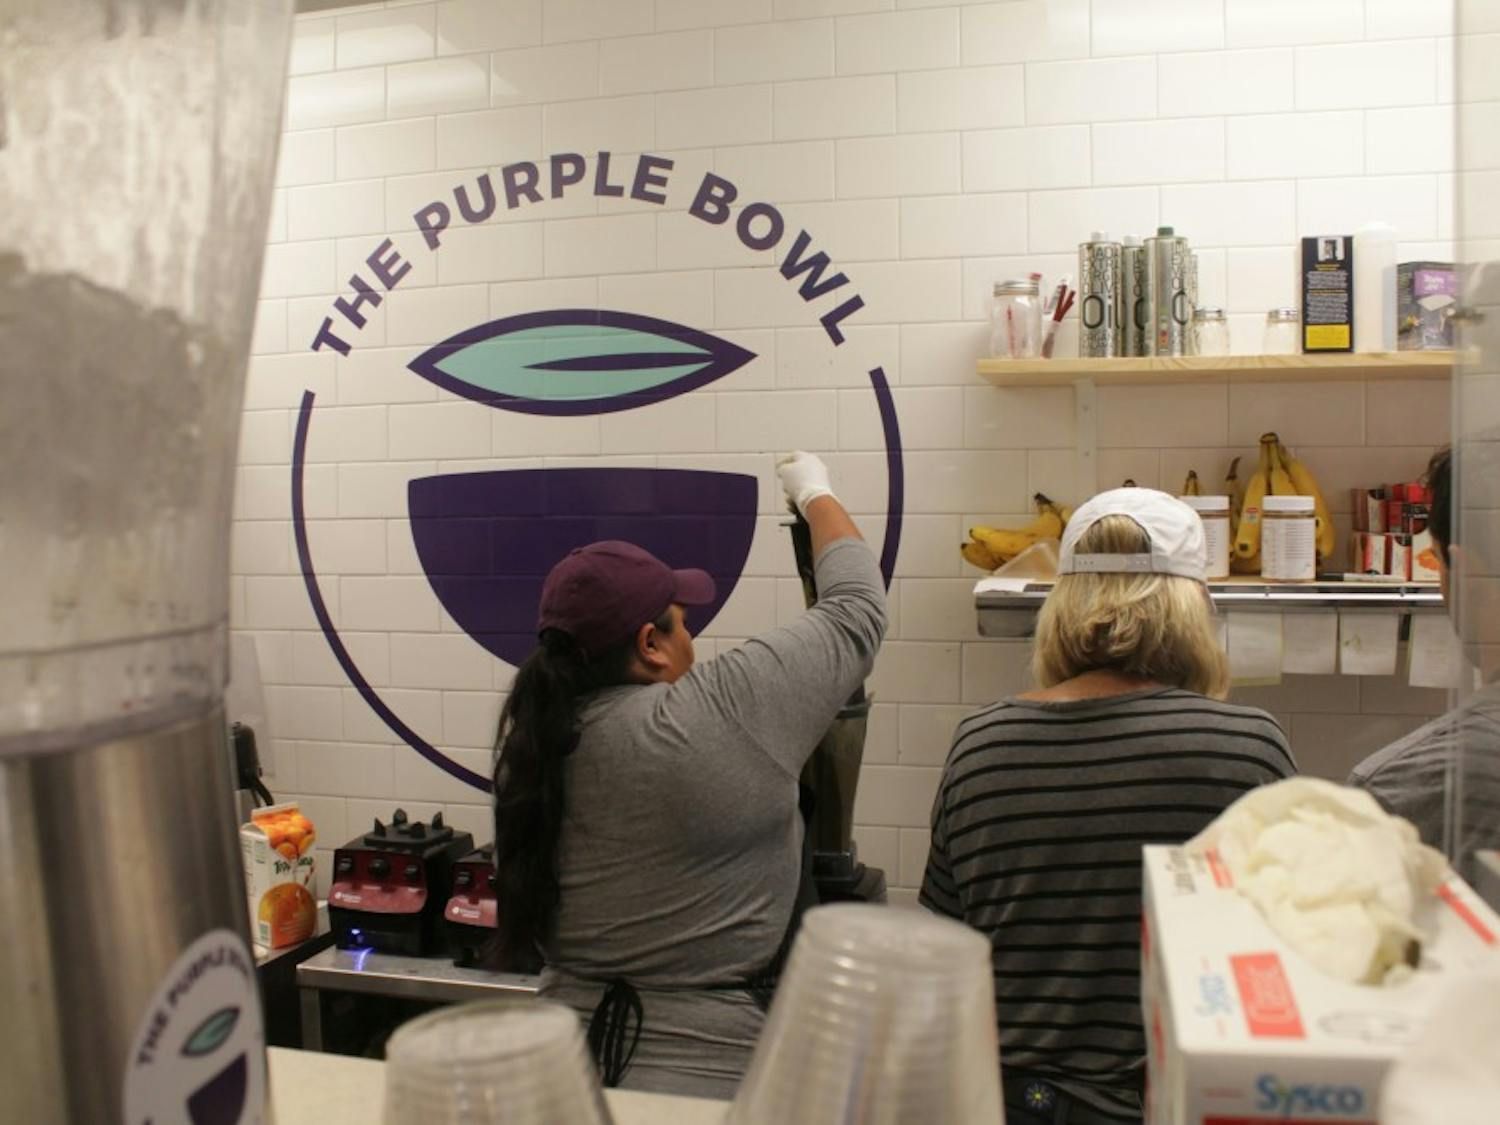 Açaí bowls have come to Franklin Street with the opening of The Purple Bowl.&nbsp;